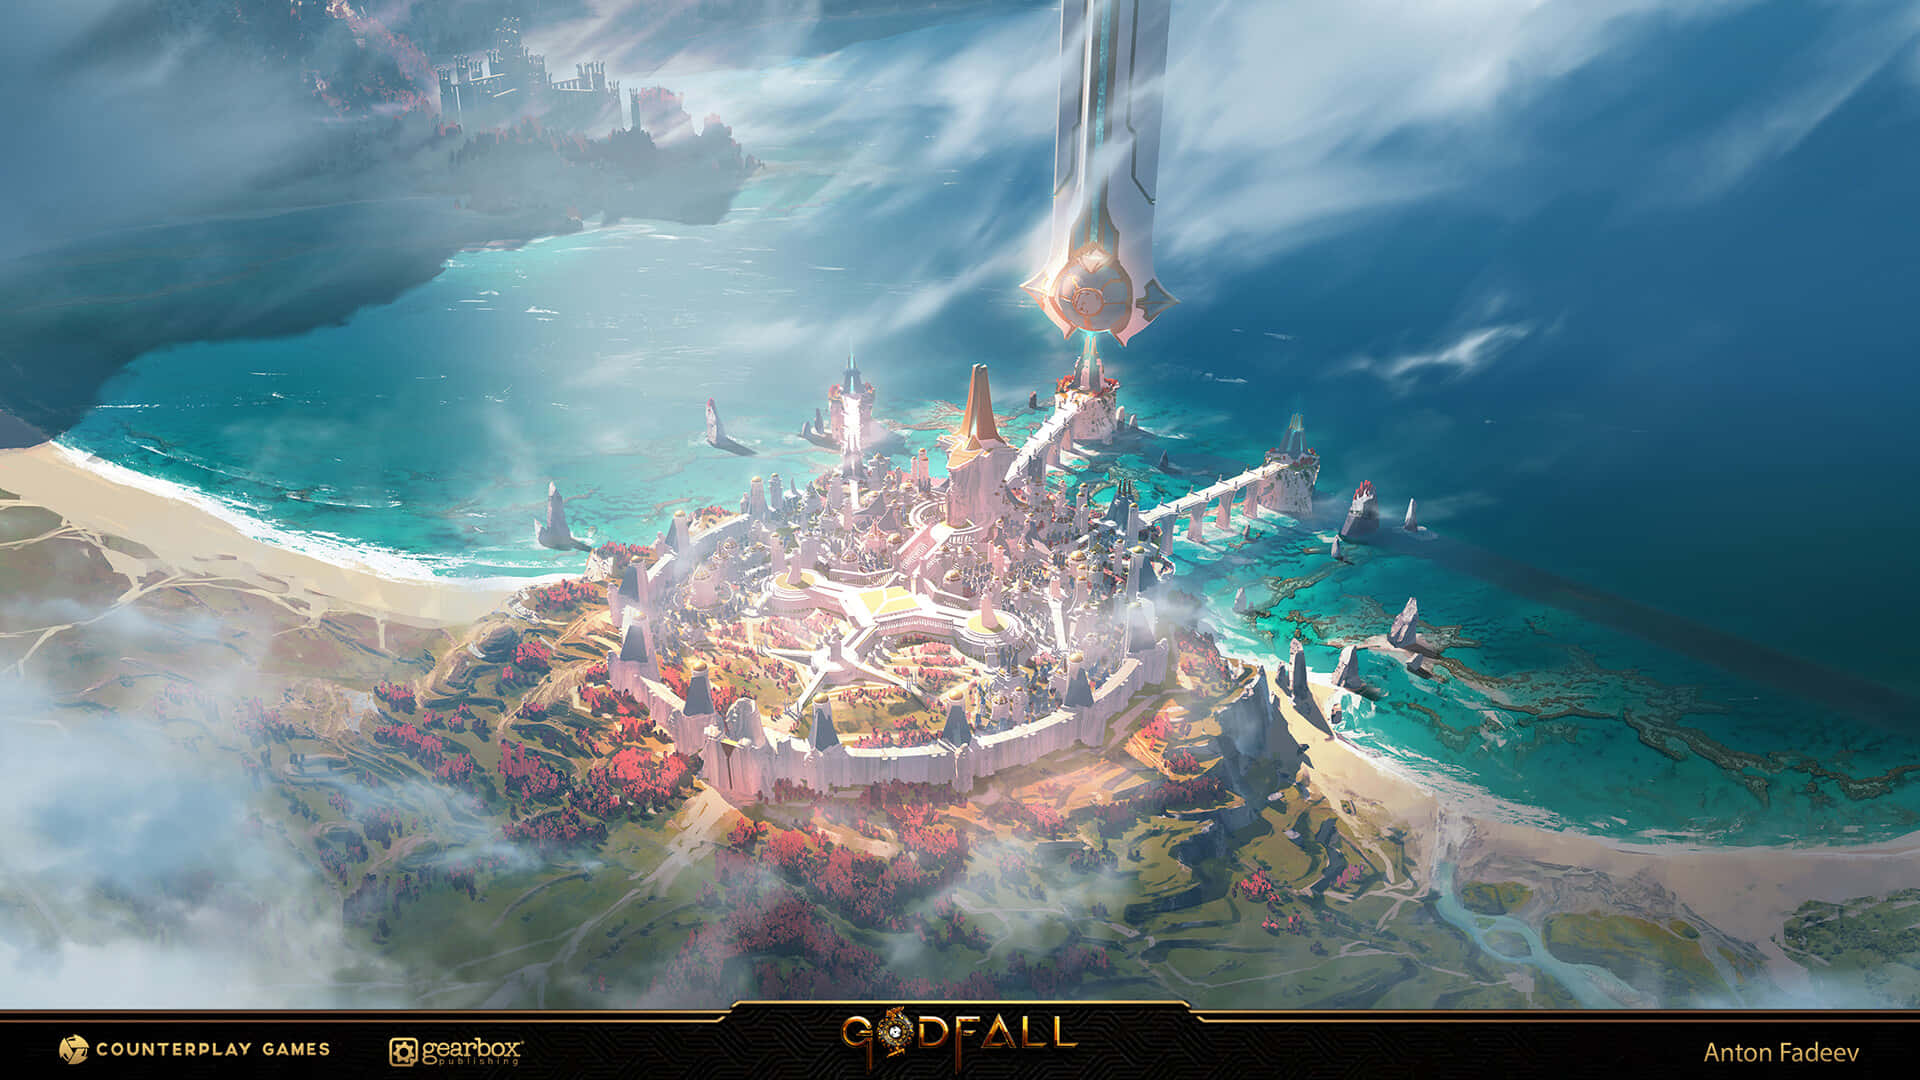 Experience an Epic Adventure with 1080p Godfall